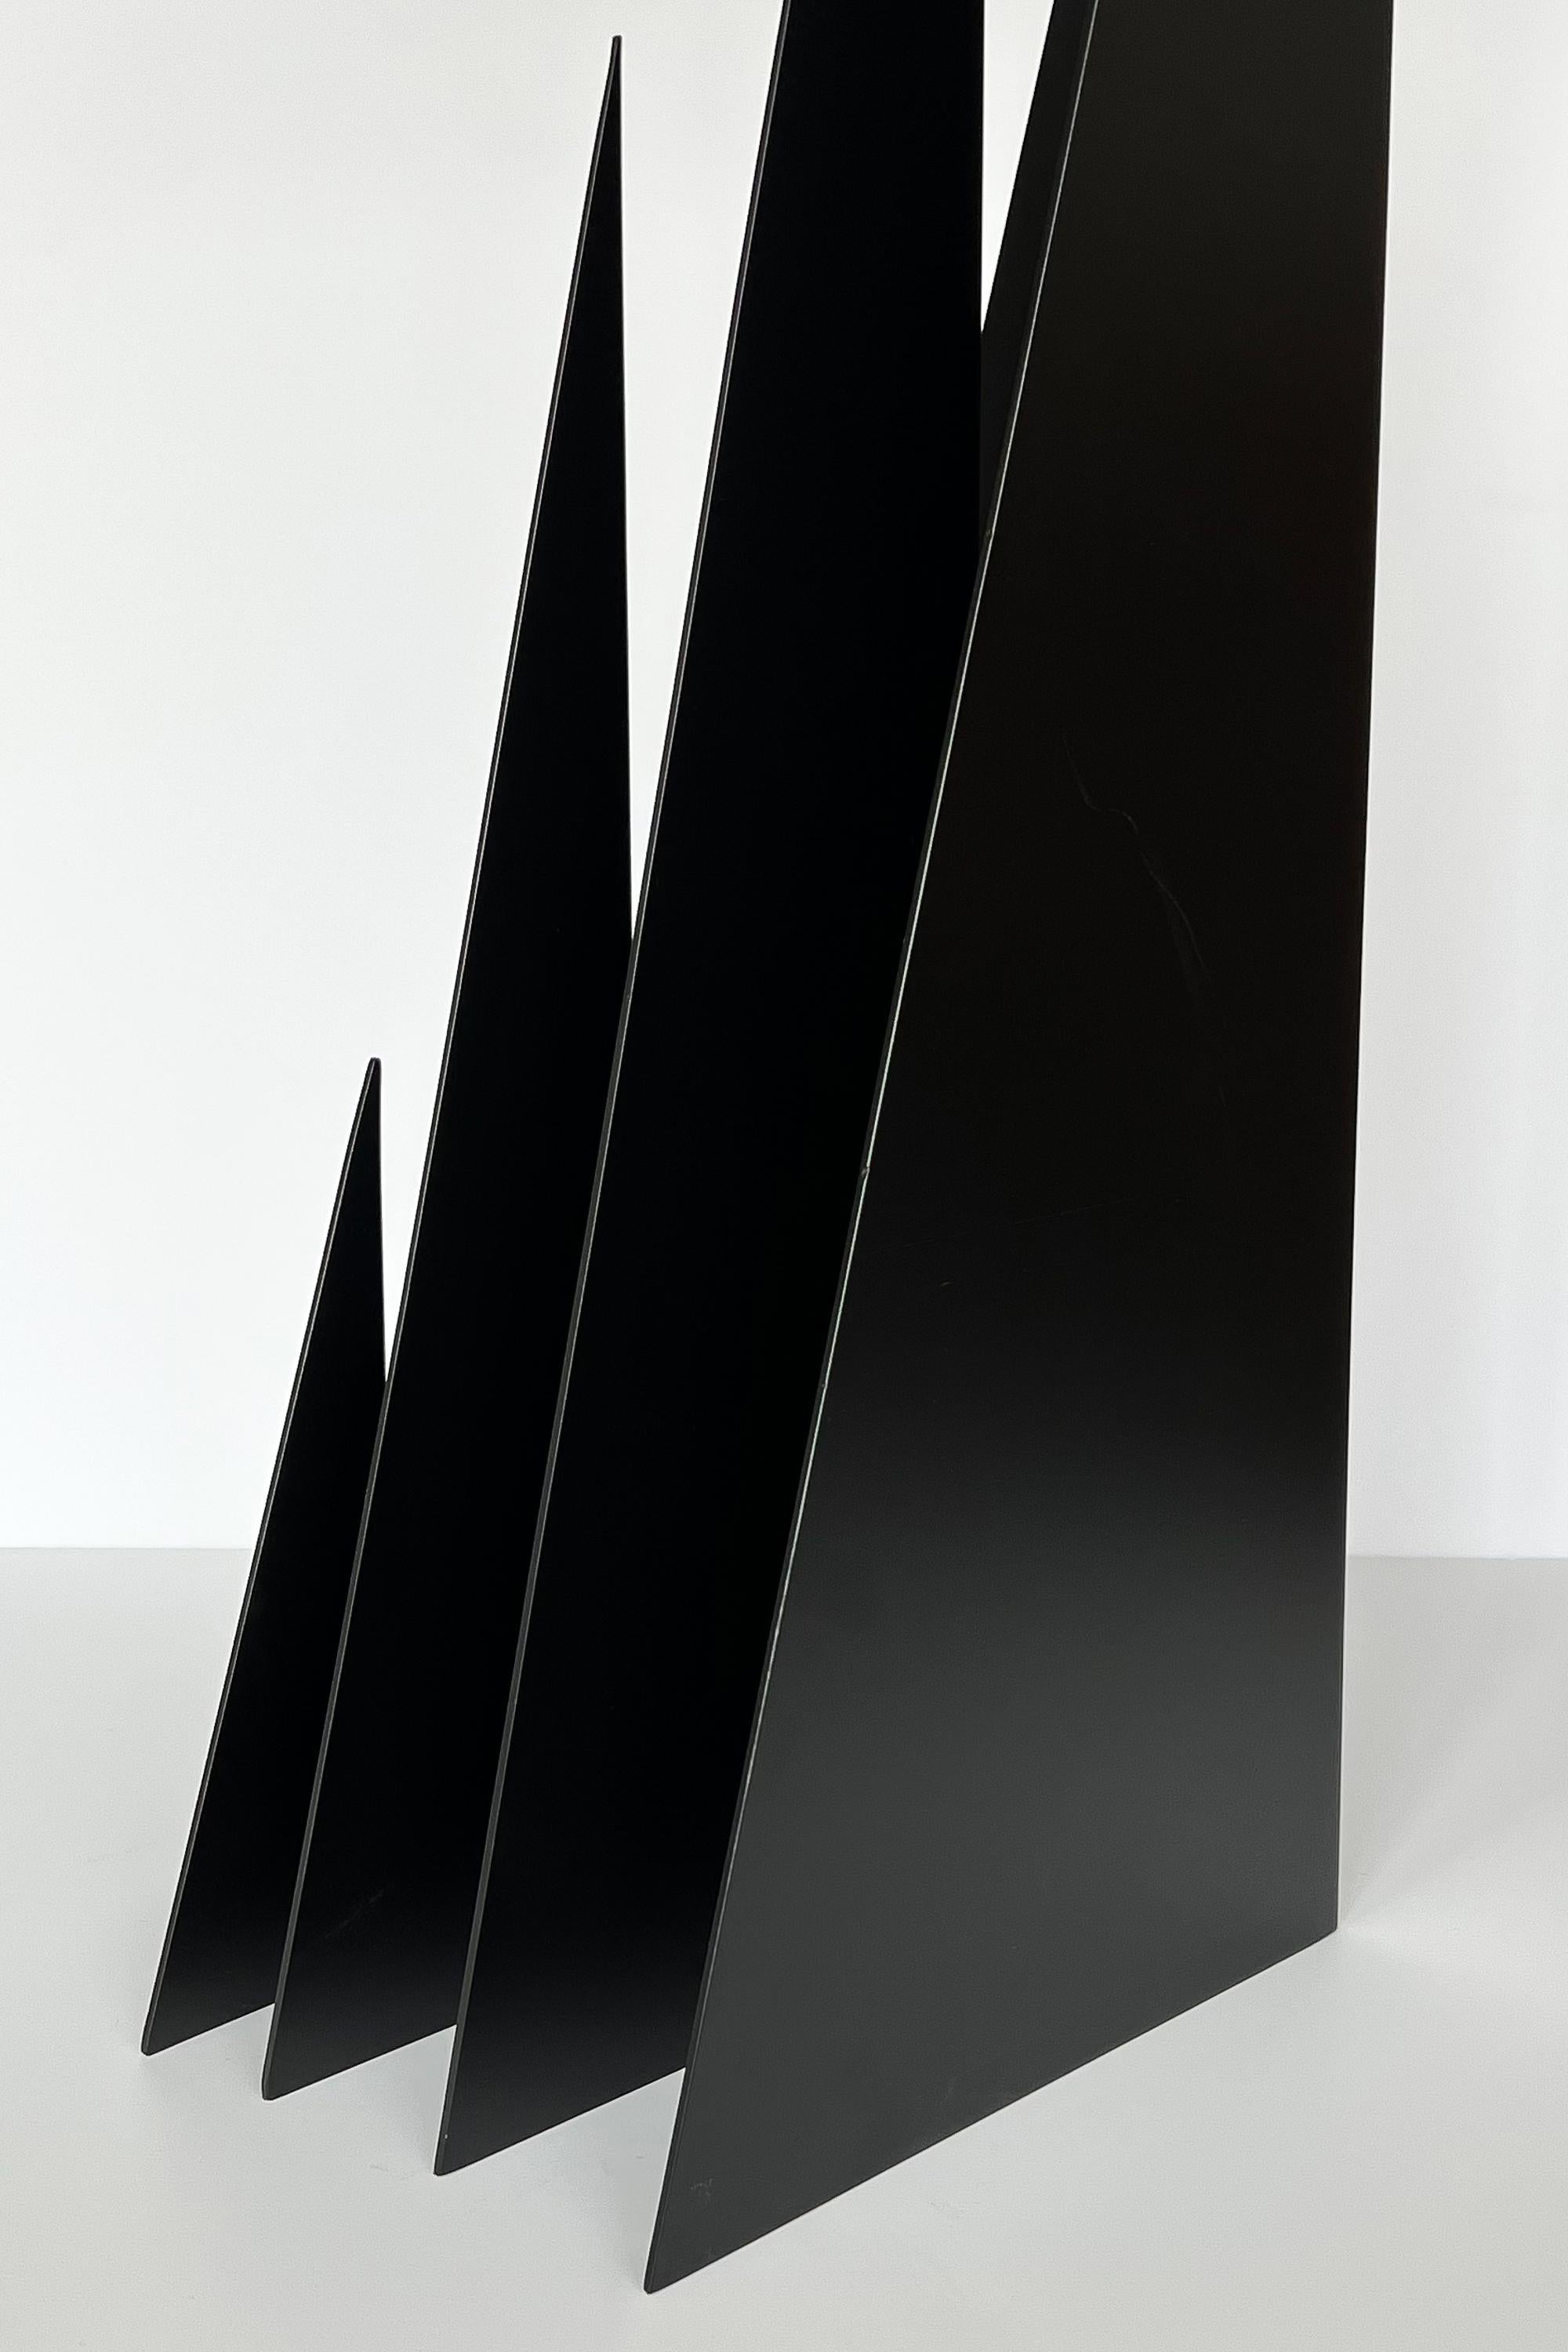 Monumental Abstract 4 Piece Steel Sculpture by Michel Degand 12